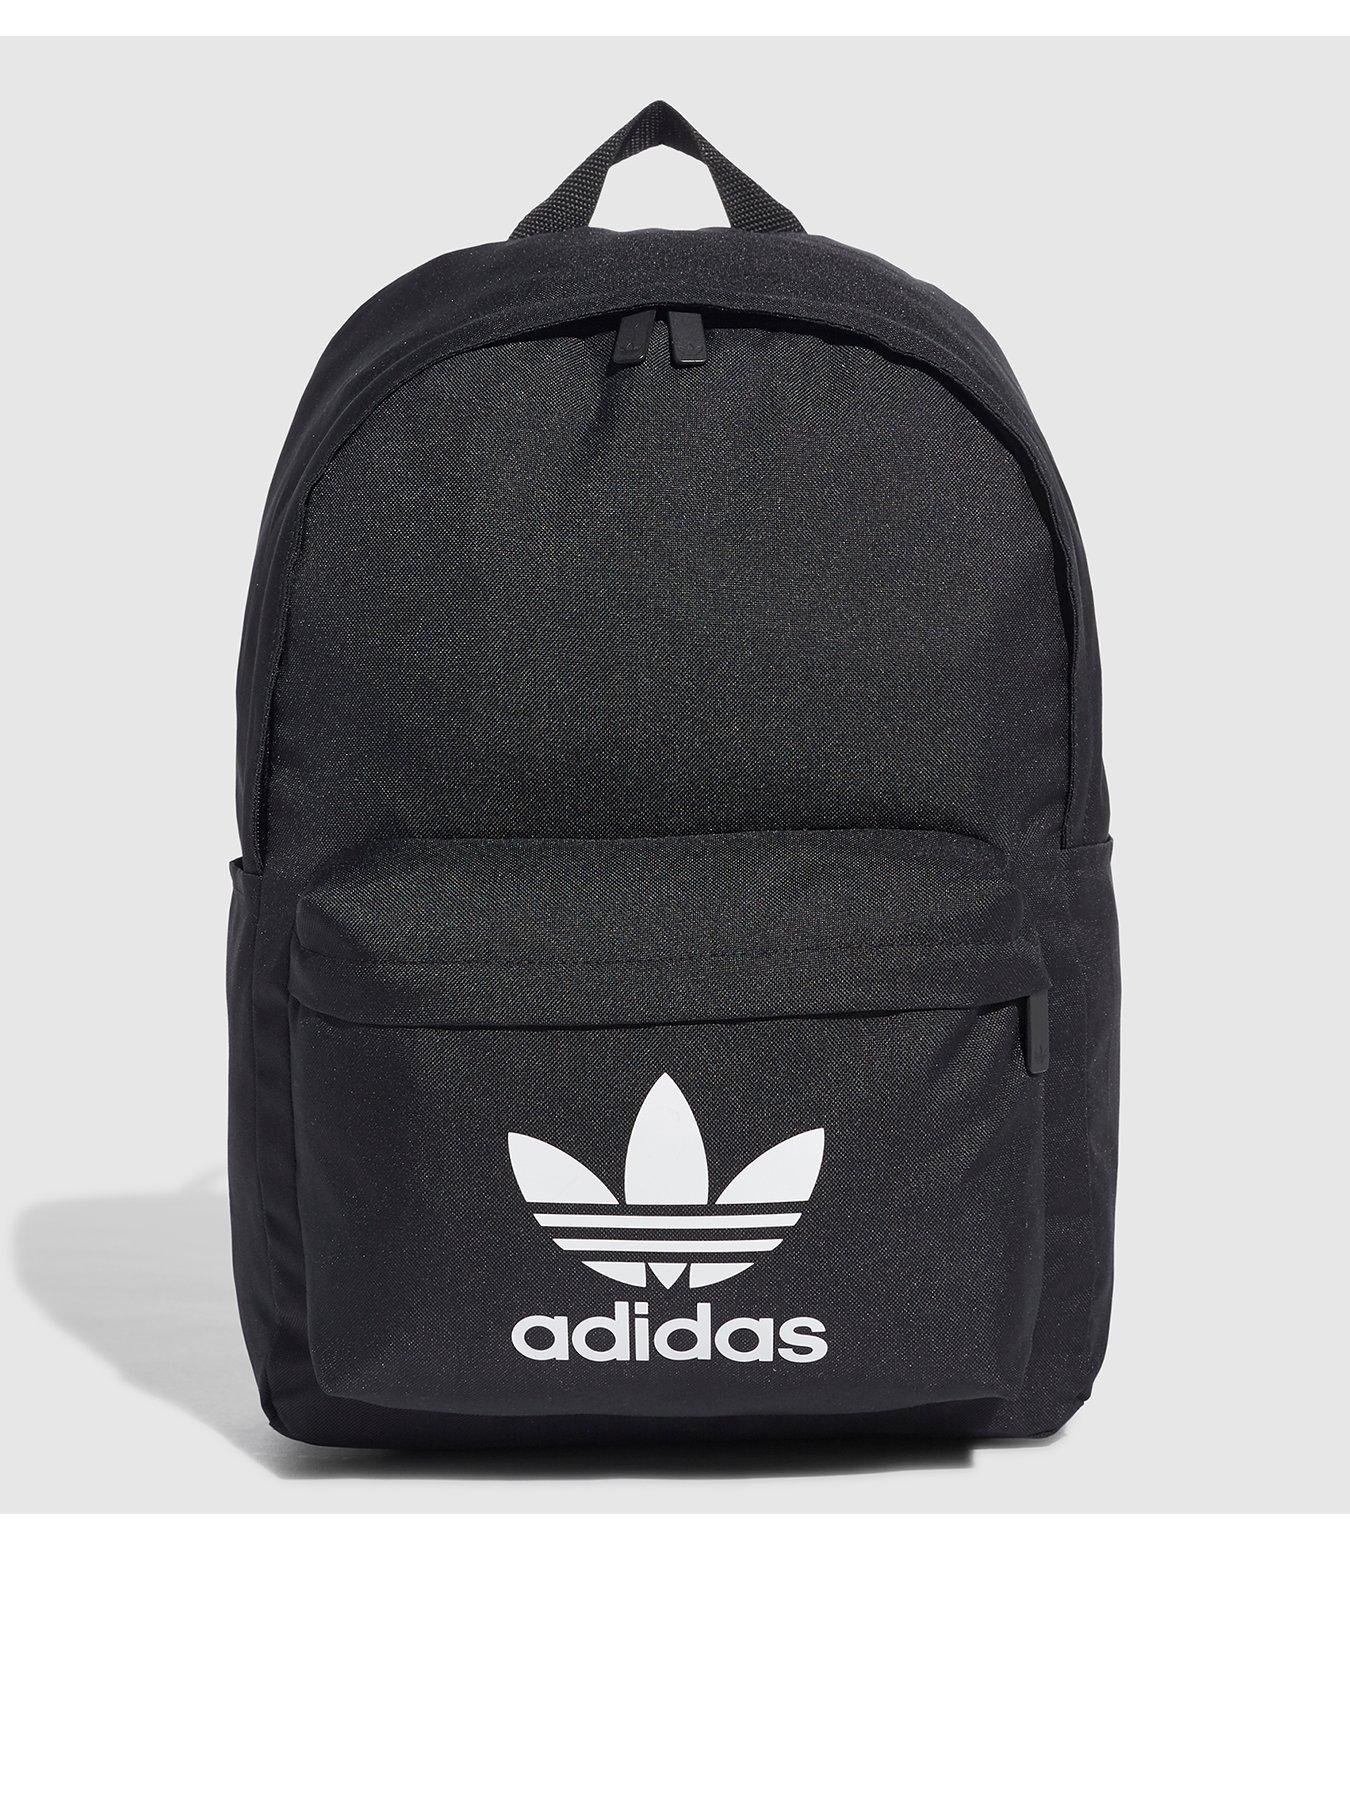 adidas backpack sports direct